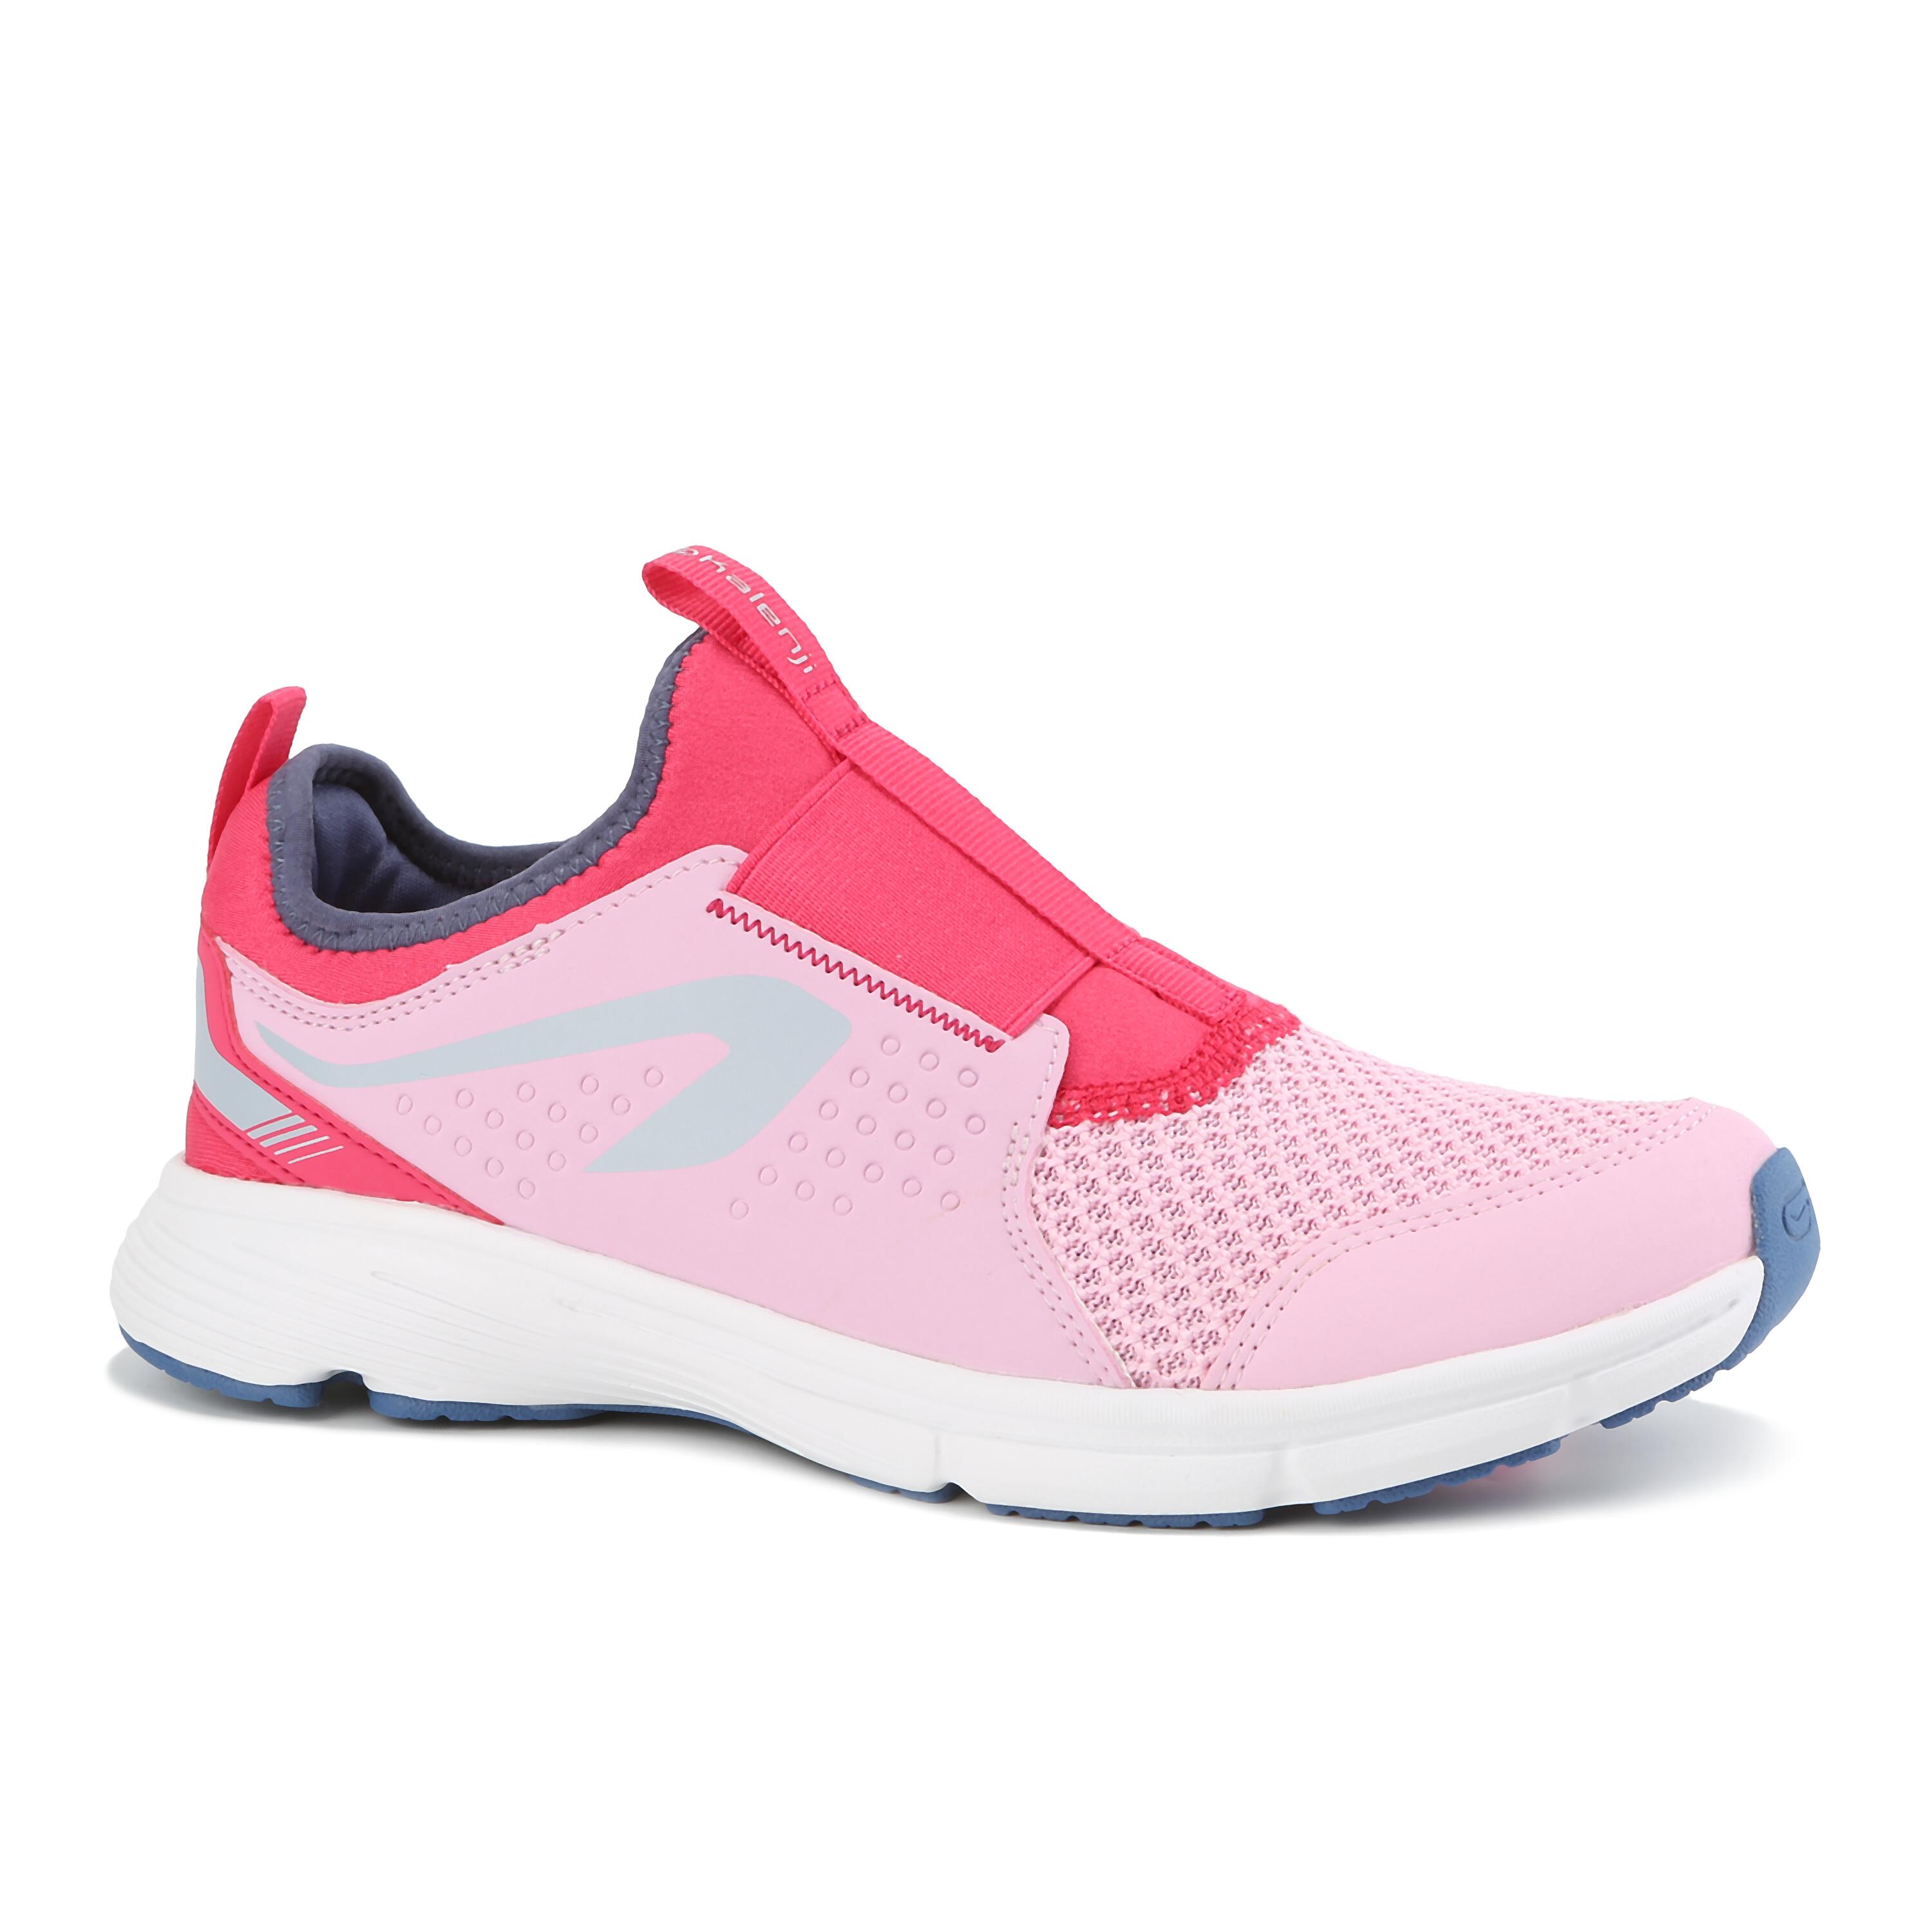 Kids Running Shoes AT Support - Pink